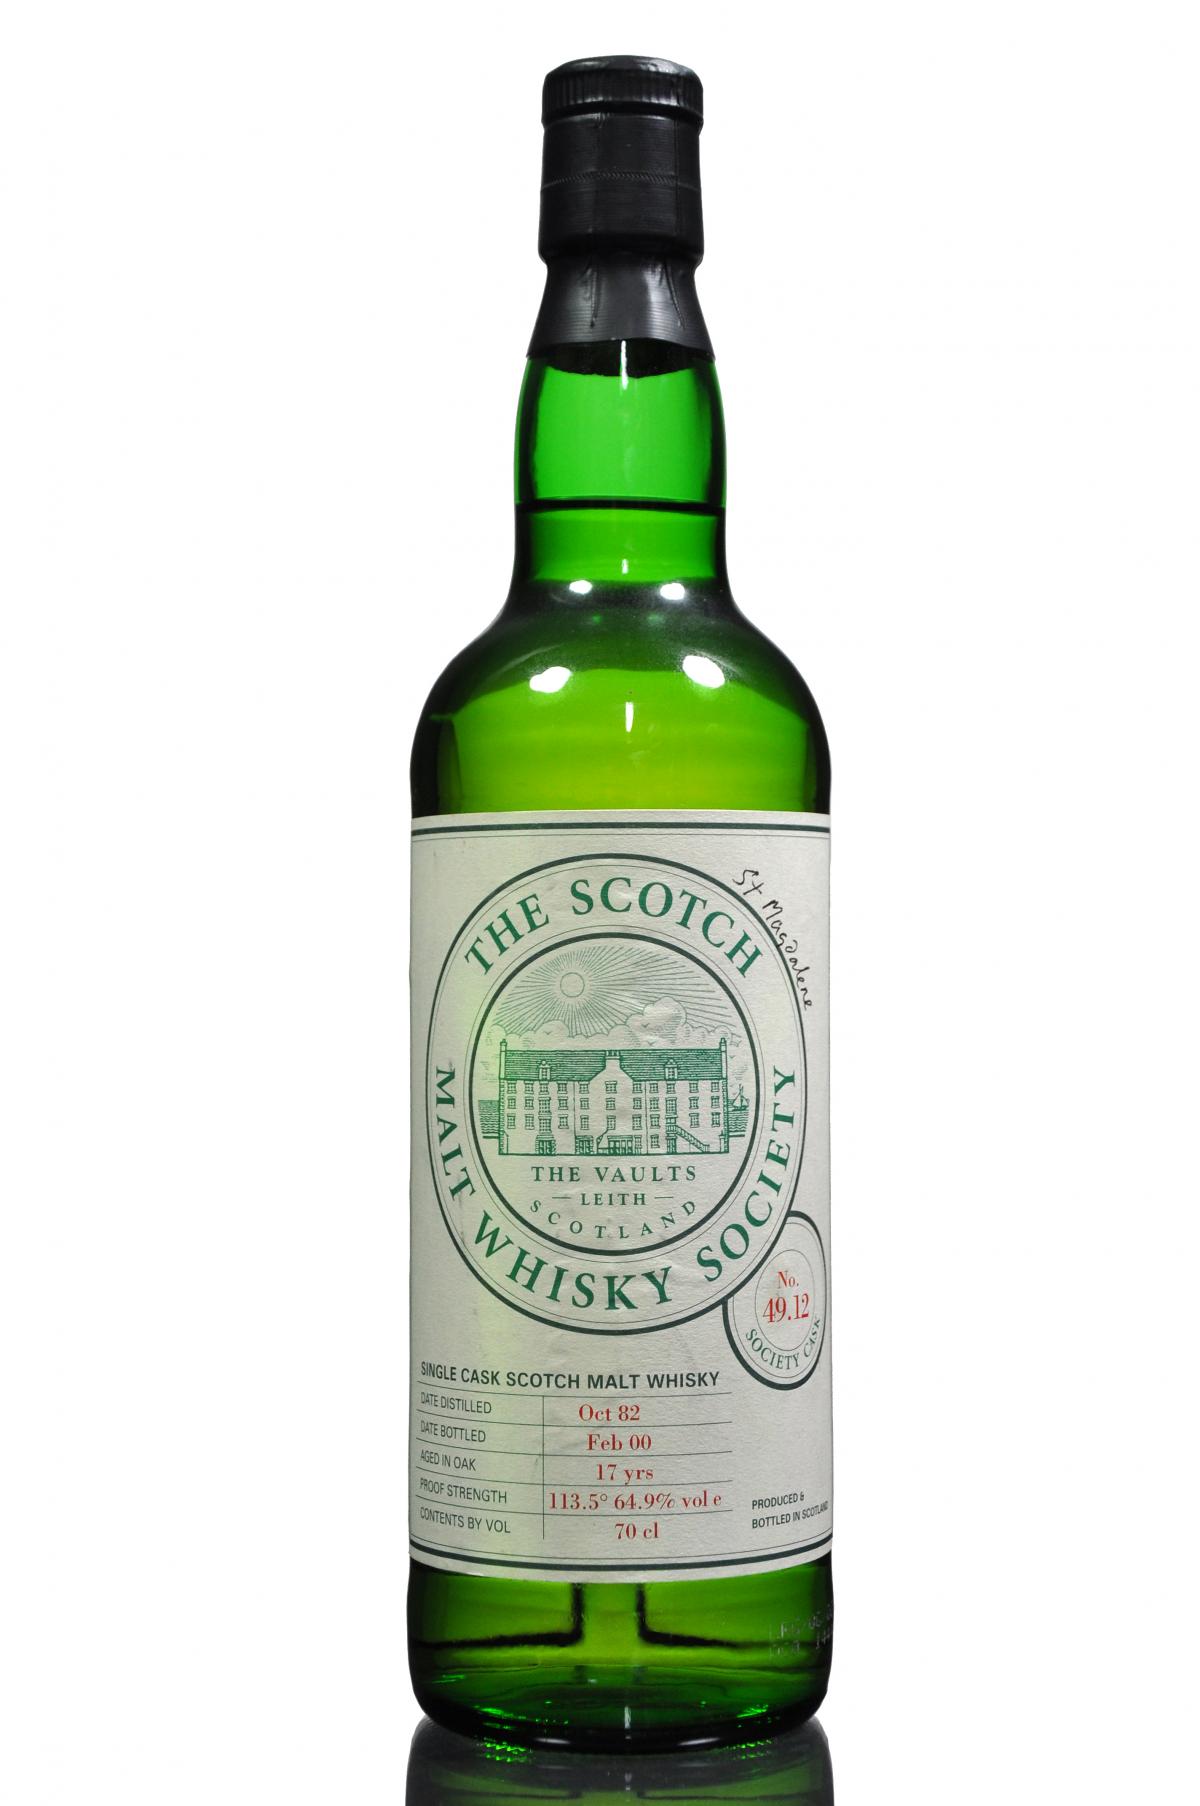 St Magdalene 1982 -2000 - 17 Year Old - SMWS 49.12